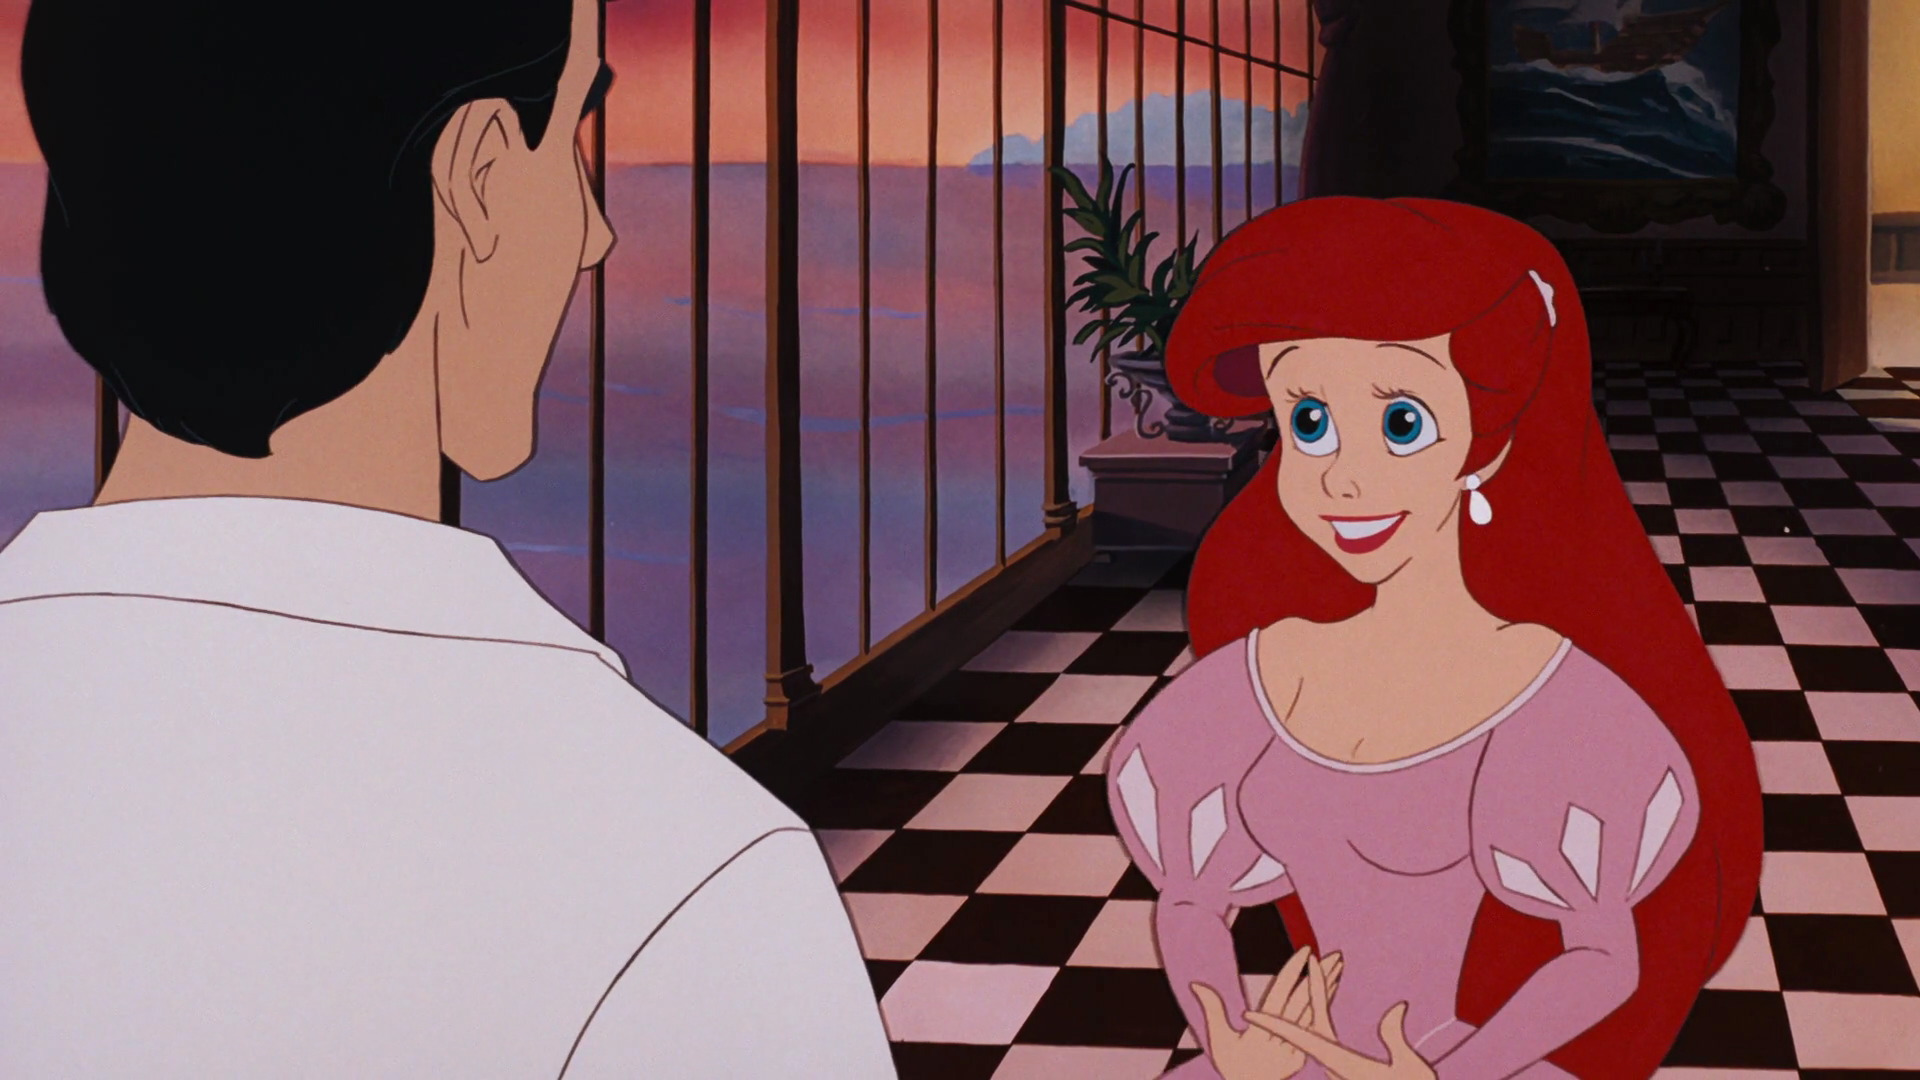 Pattern suggestion for creating Ariel's pink dress - A to Z